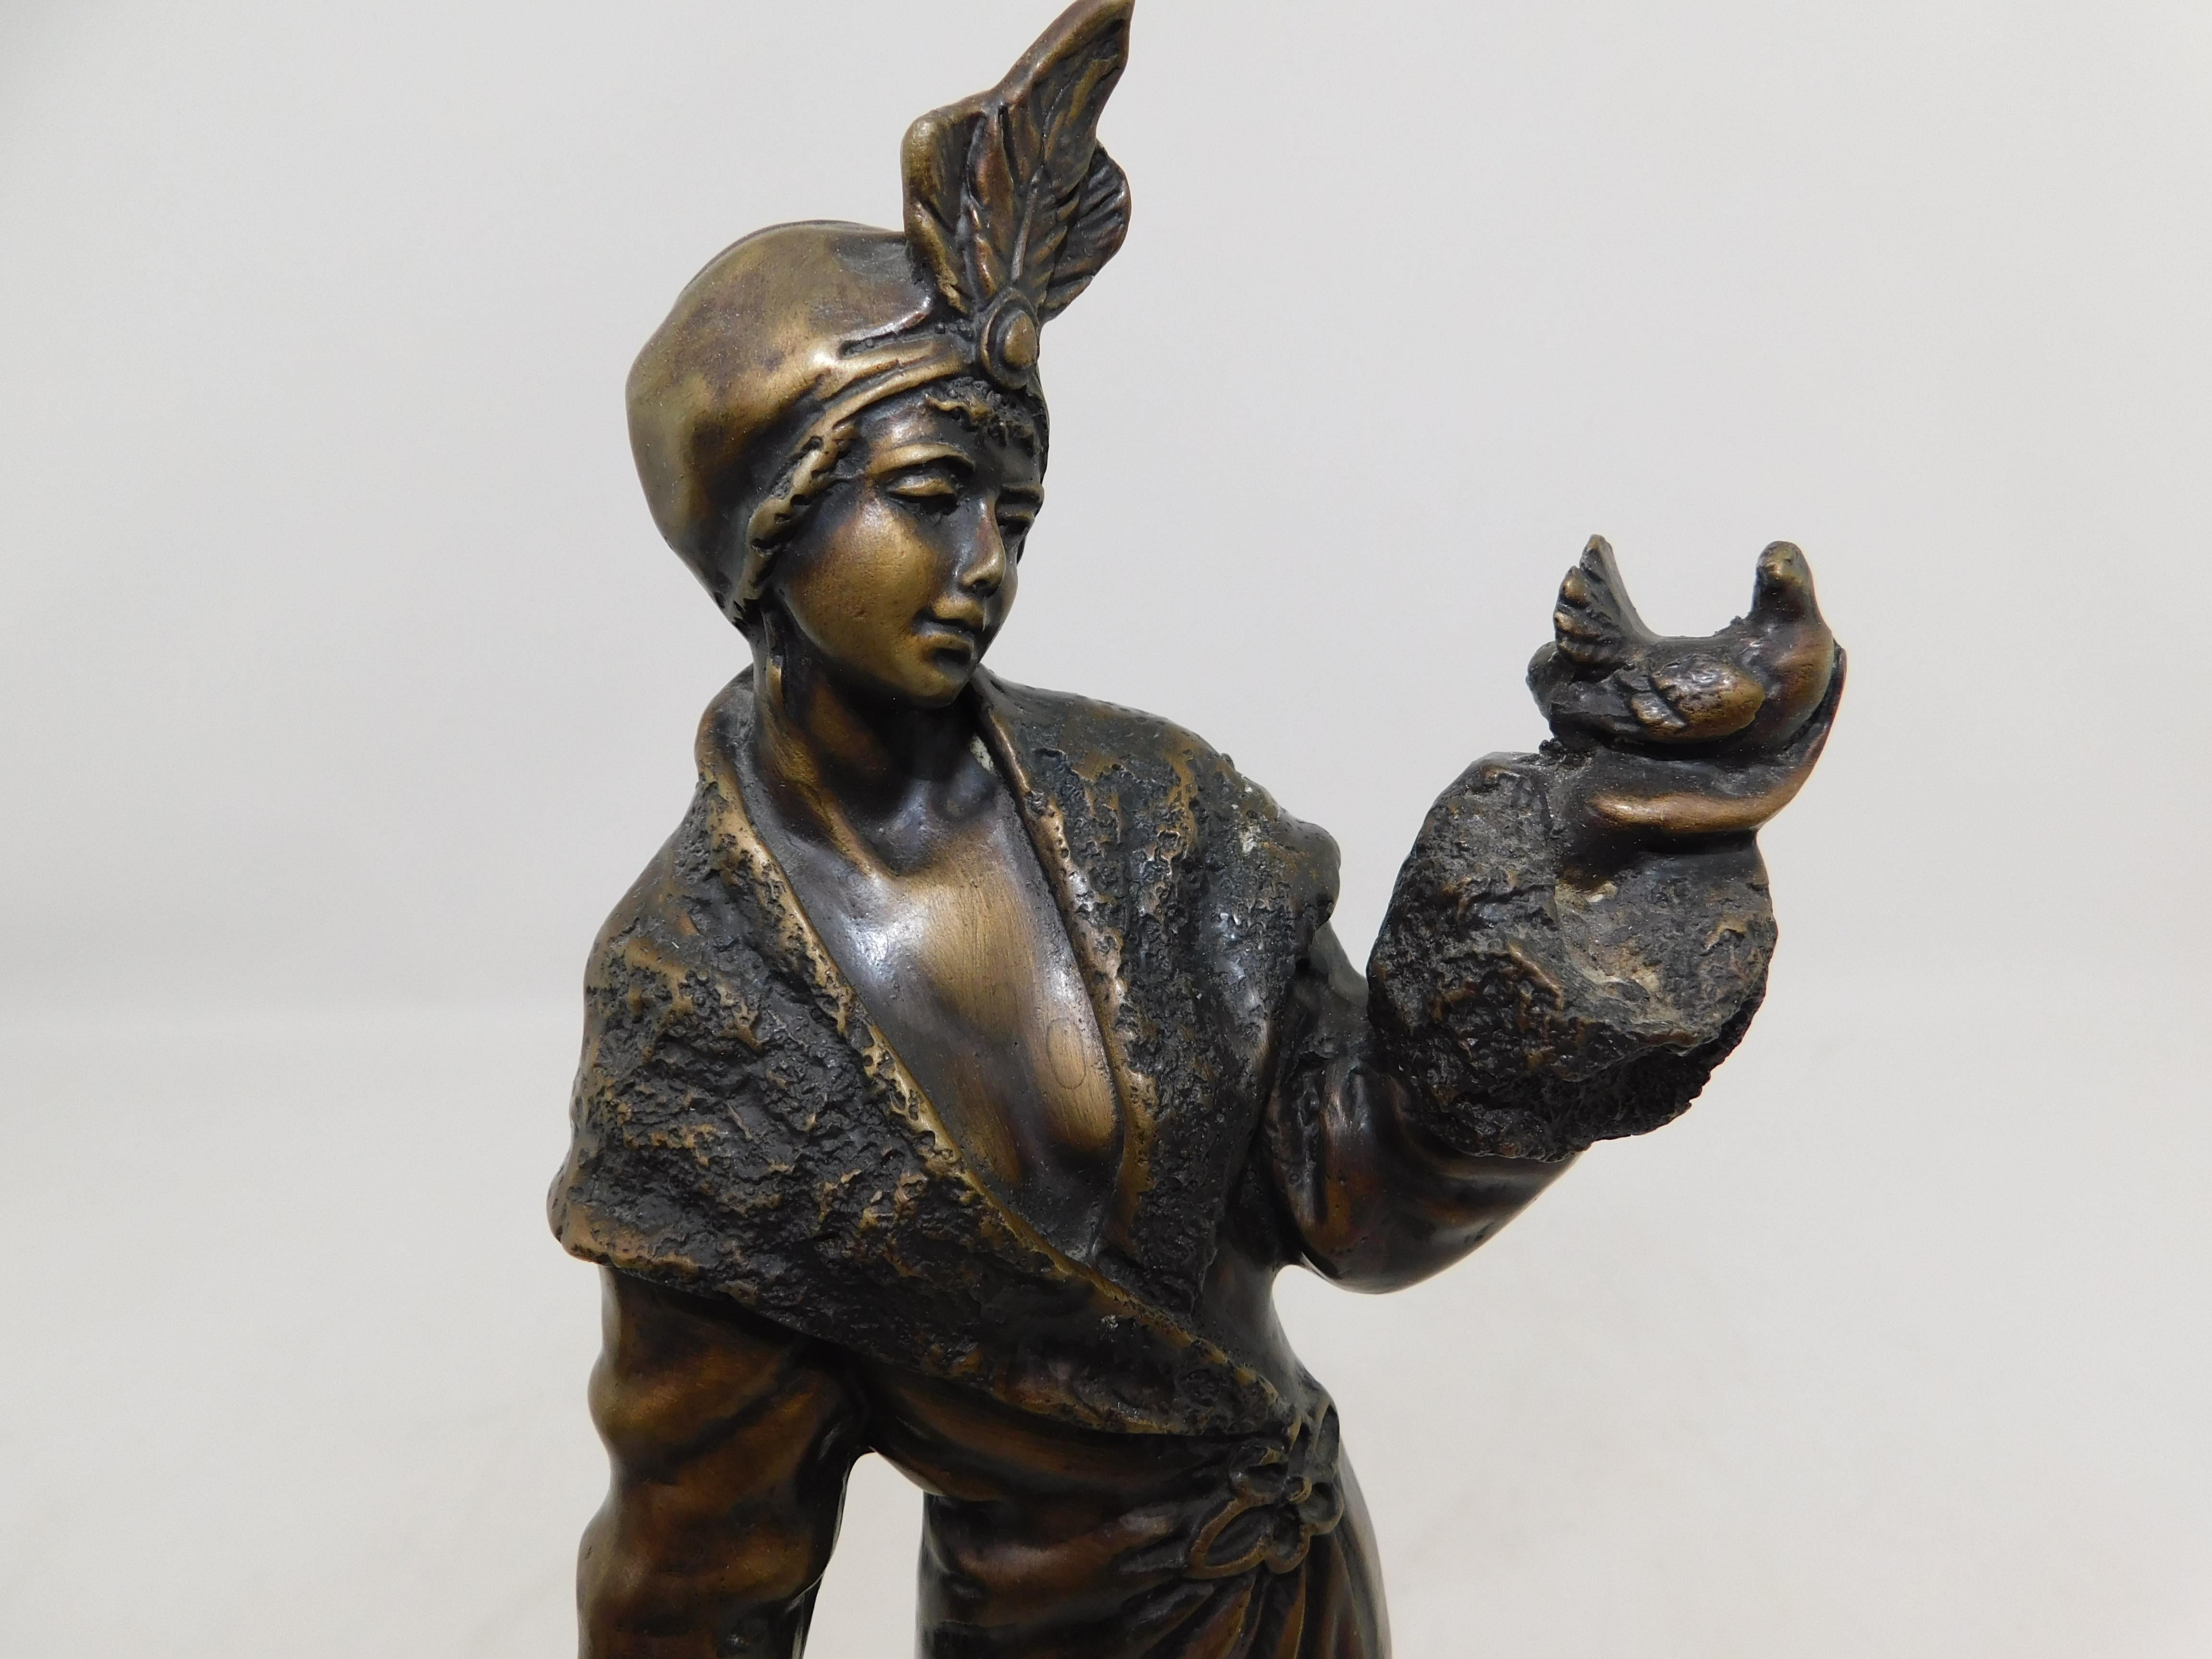 Bronze Art Deco Figurine Sculpture Woman with Doves in Flowing Dress on Marble In Good Condition For Sale In Hamilton, Ontario